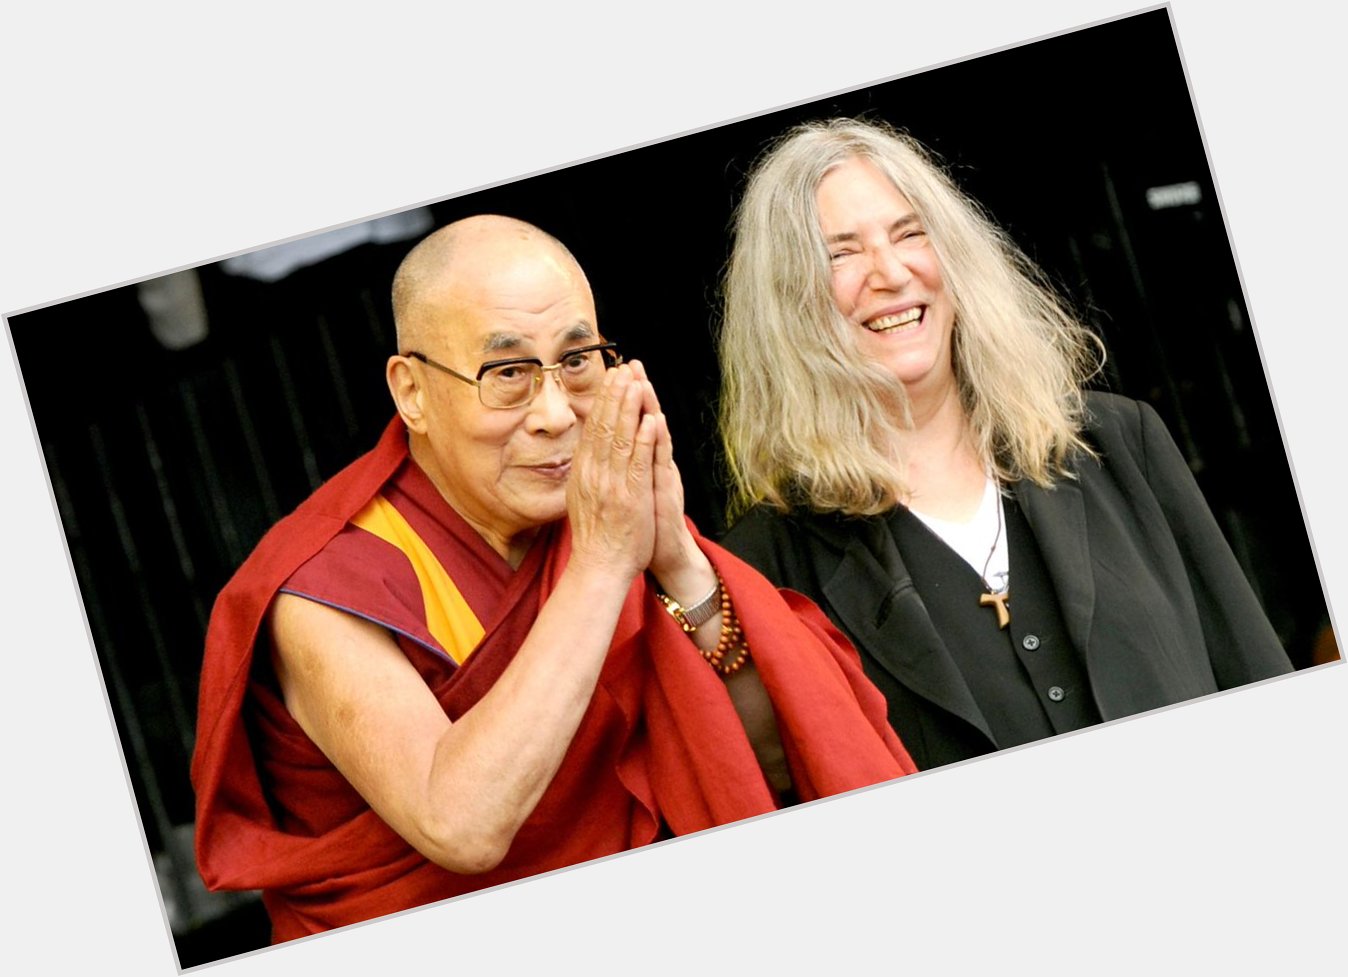 HAPPY 69TH BIRTHDAY PATTI SMITH! WE LOVE YOU!

Here she is hanging out with the Dalai Lama on his 80th Birthday... 